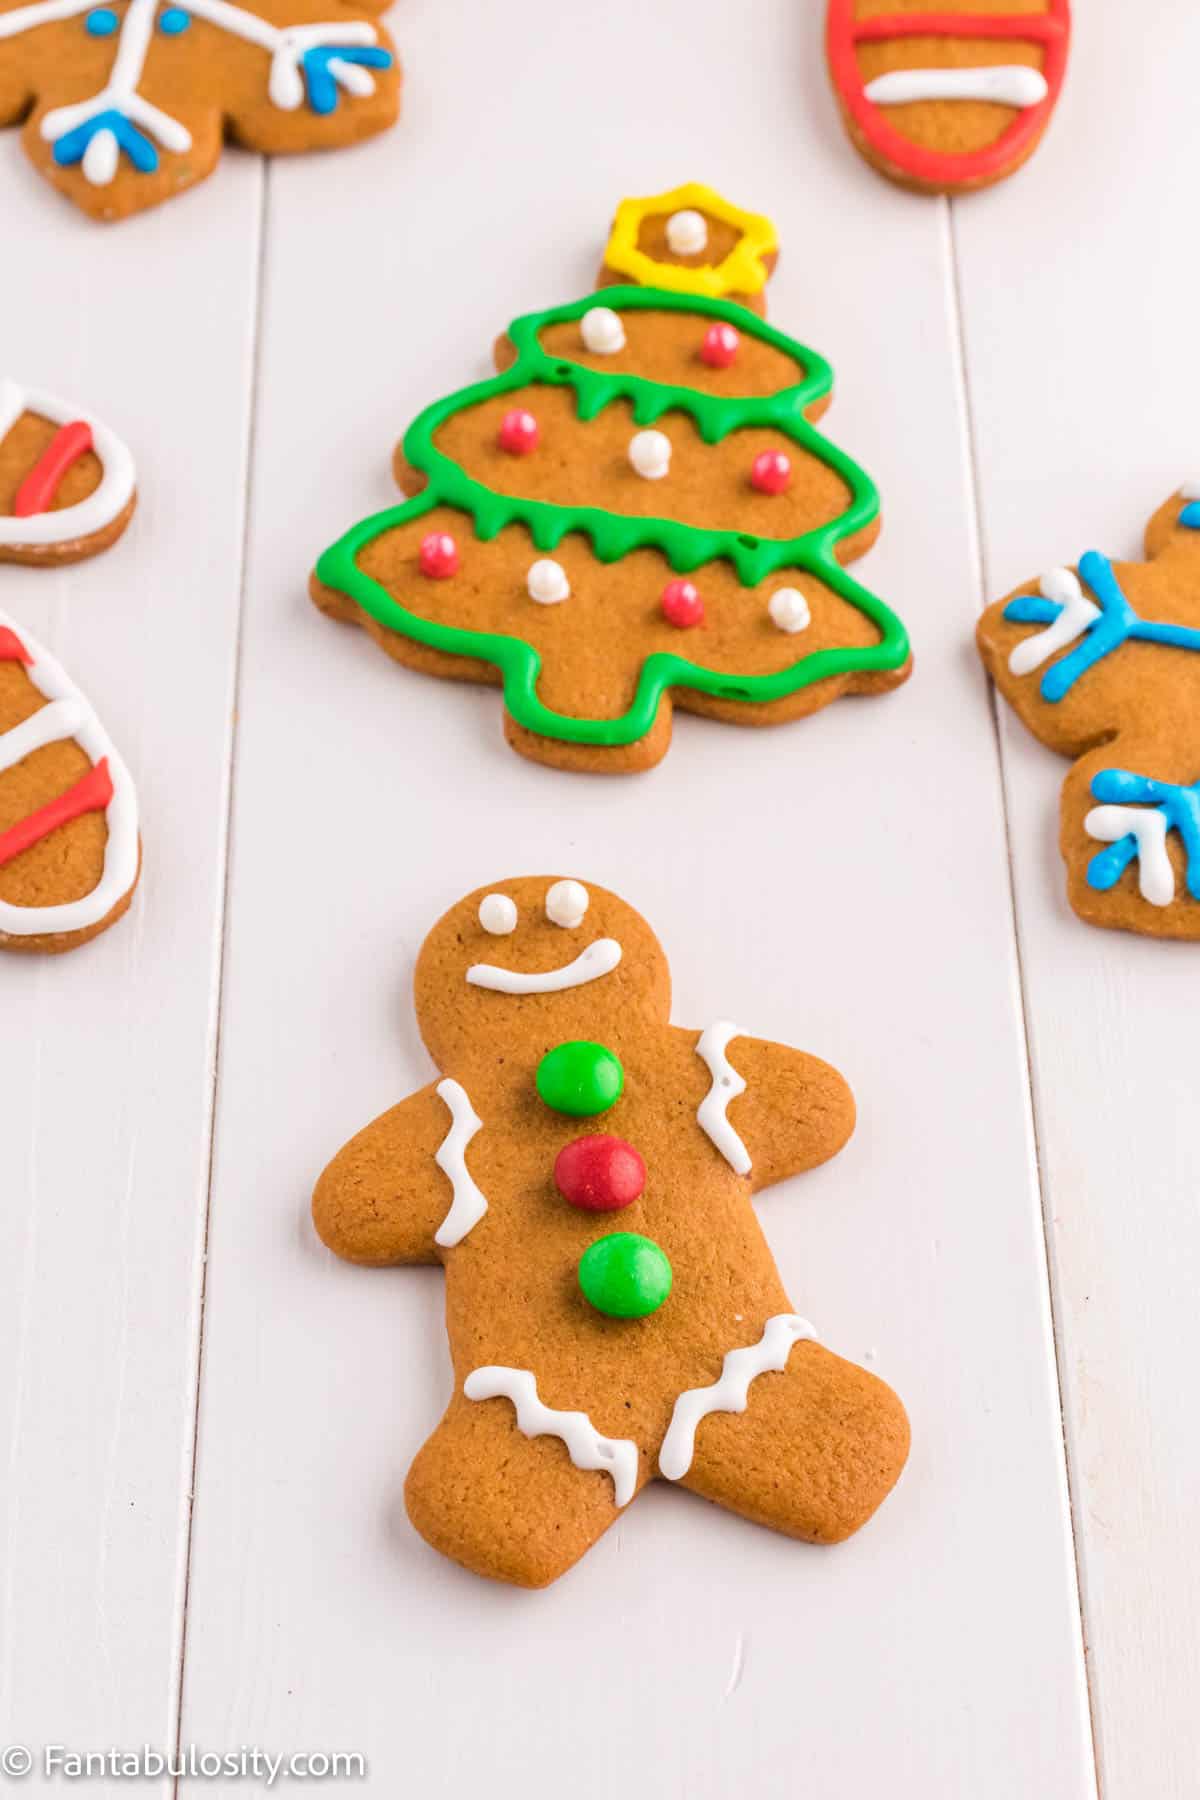 Brightly piped and decorated Christmas cookies shaped like gingerbread, snowflakes, trees and candy canes are displayed on a white background